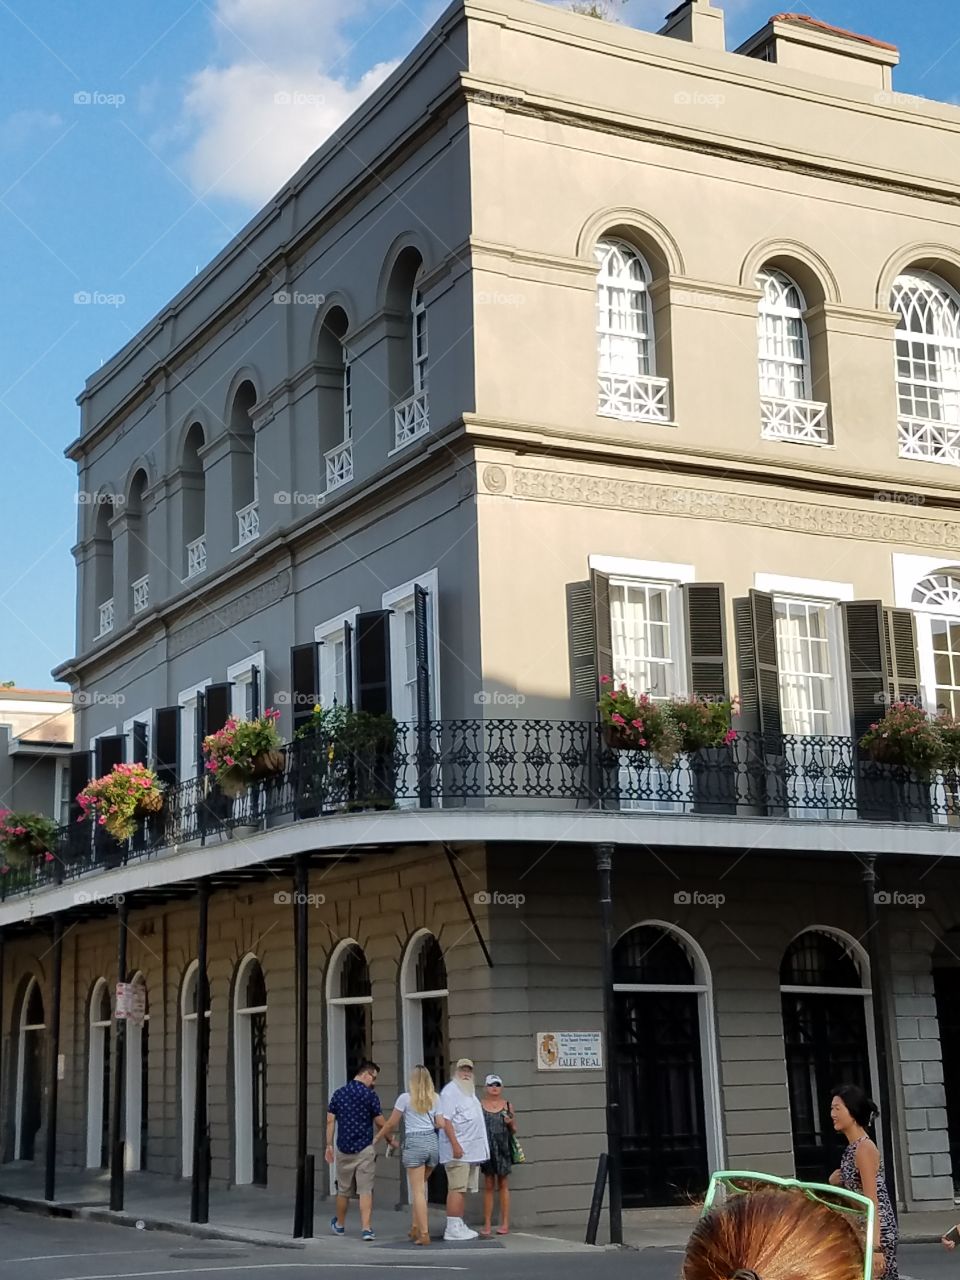 New Orleans Haunted Tour